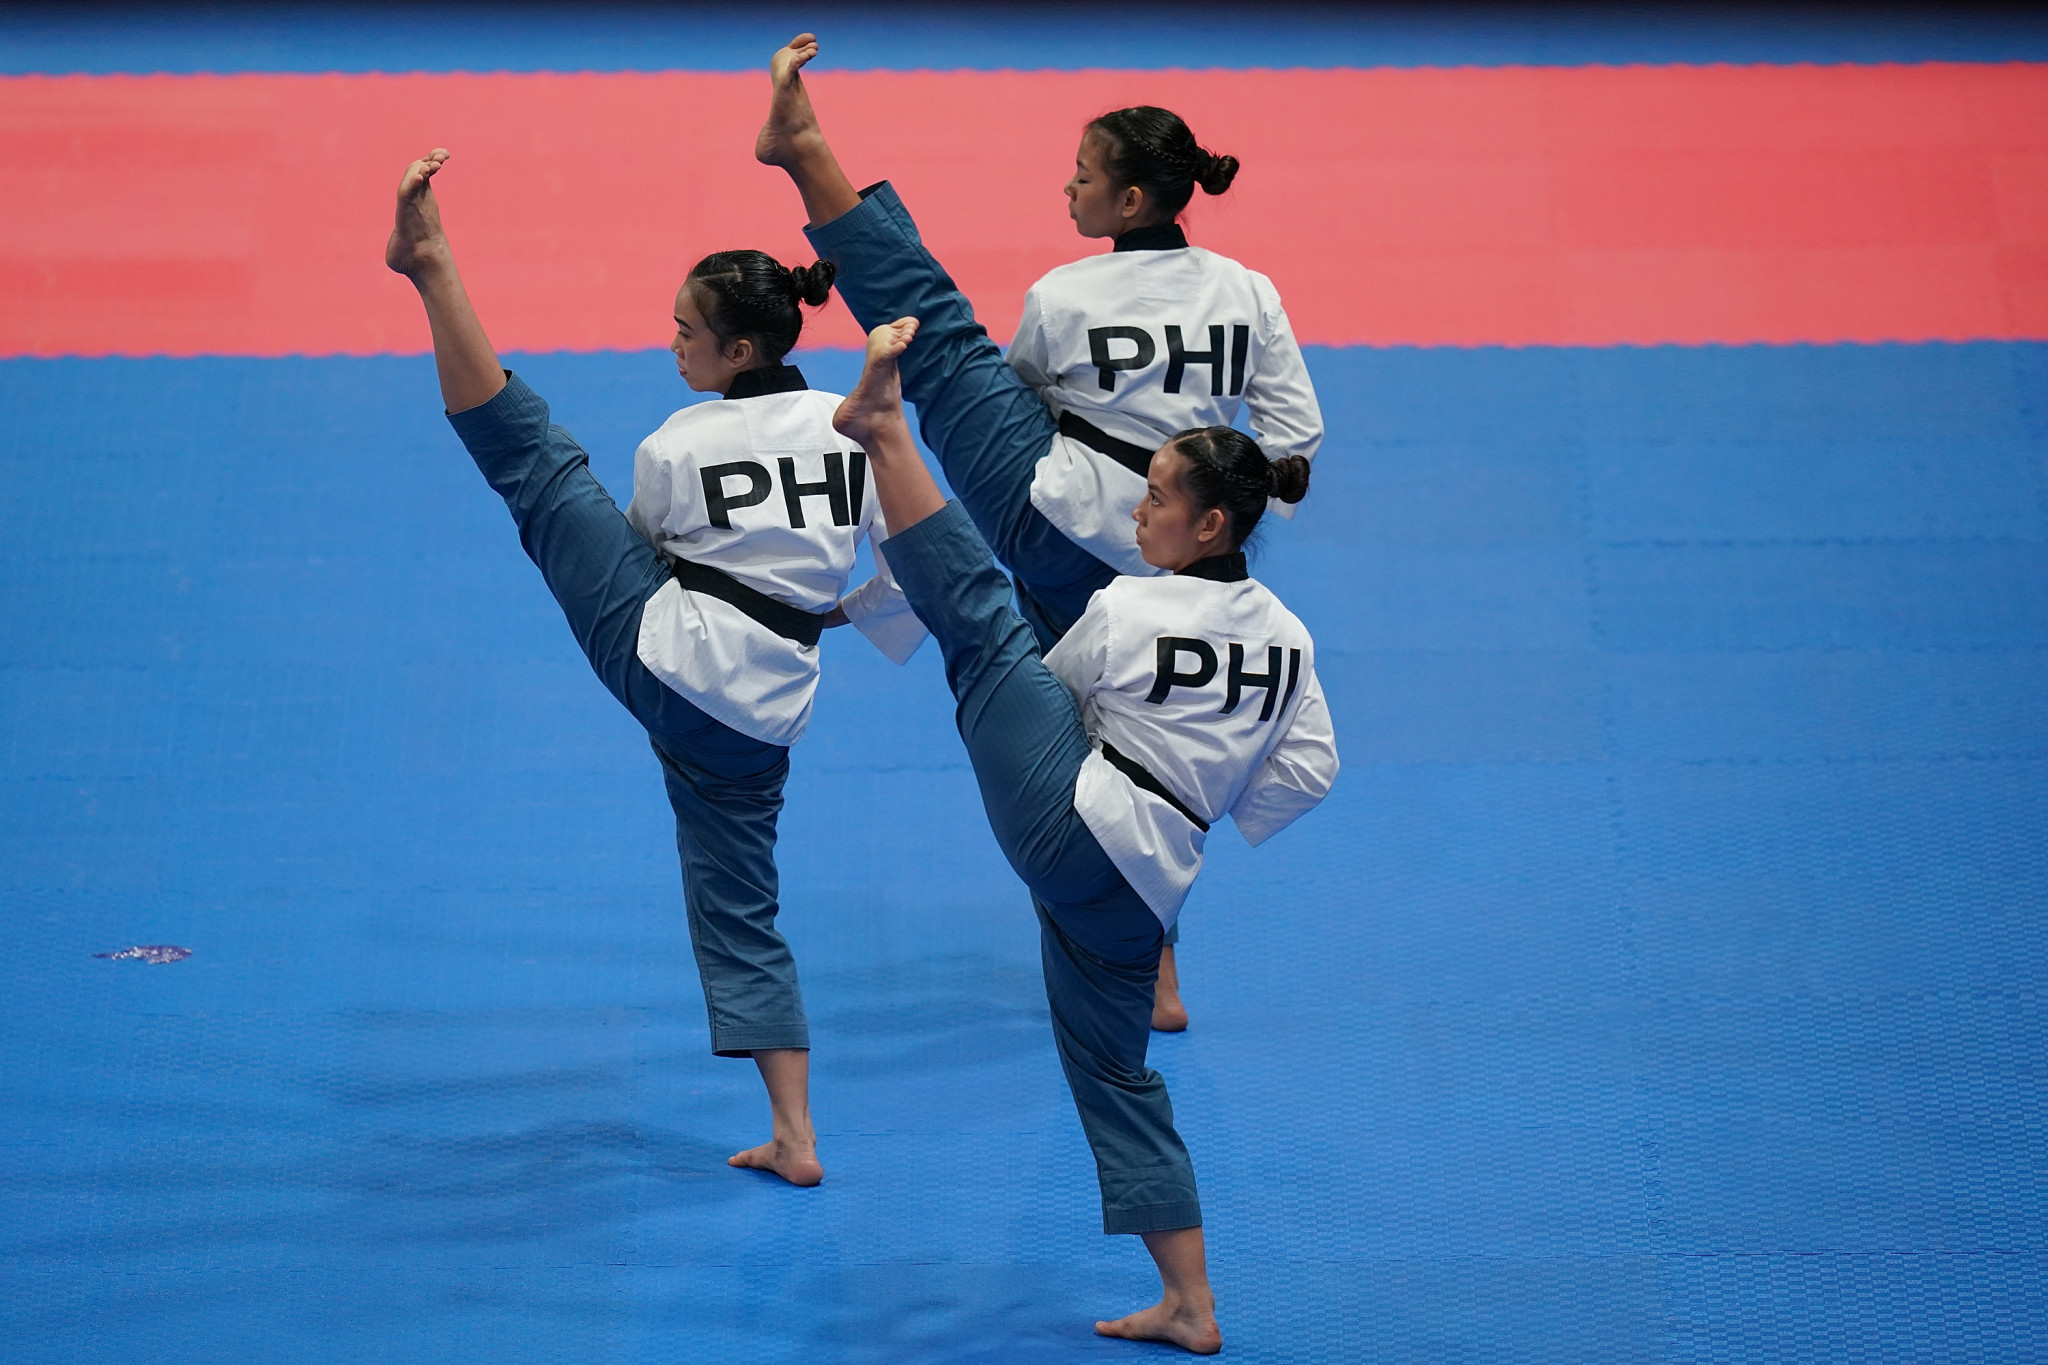 Poomsae taekwondo featured at the Asian Games for the first time in 2018 ©Getty Images